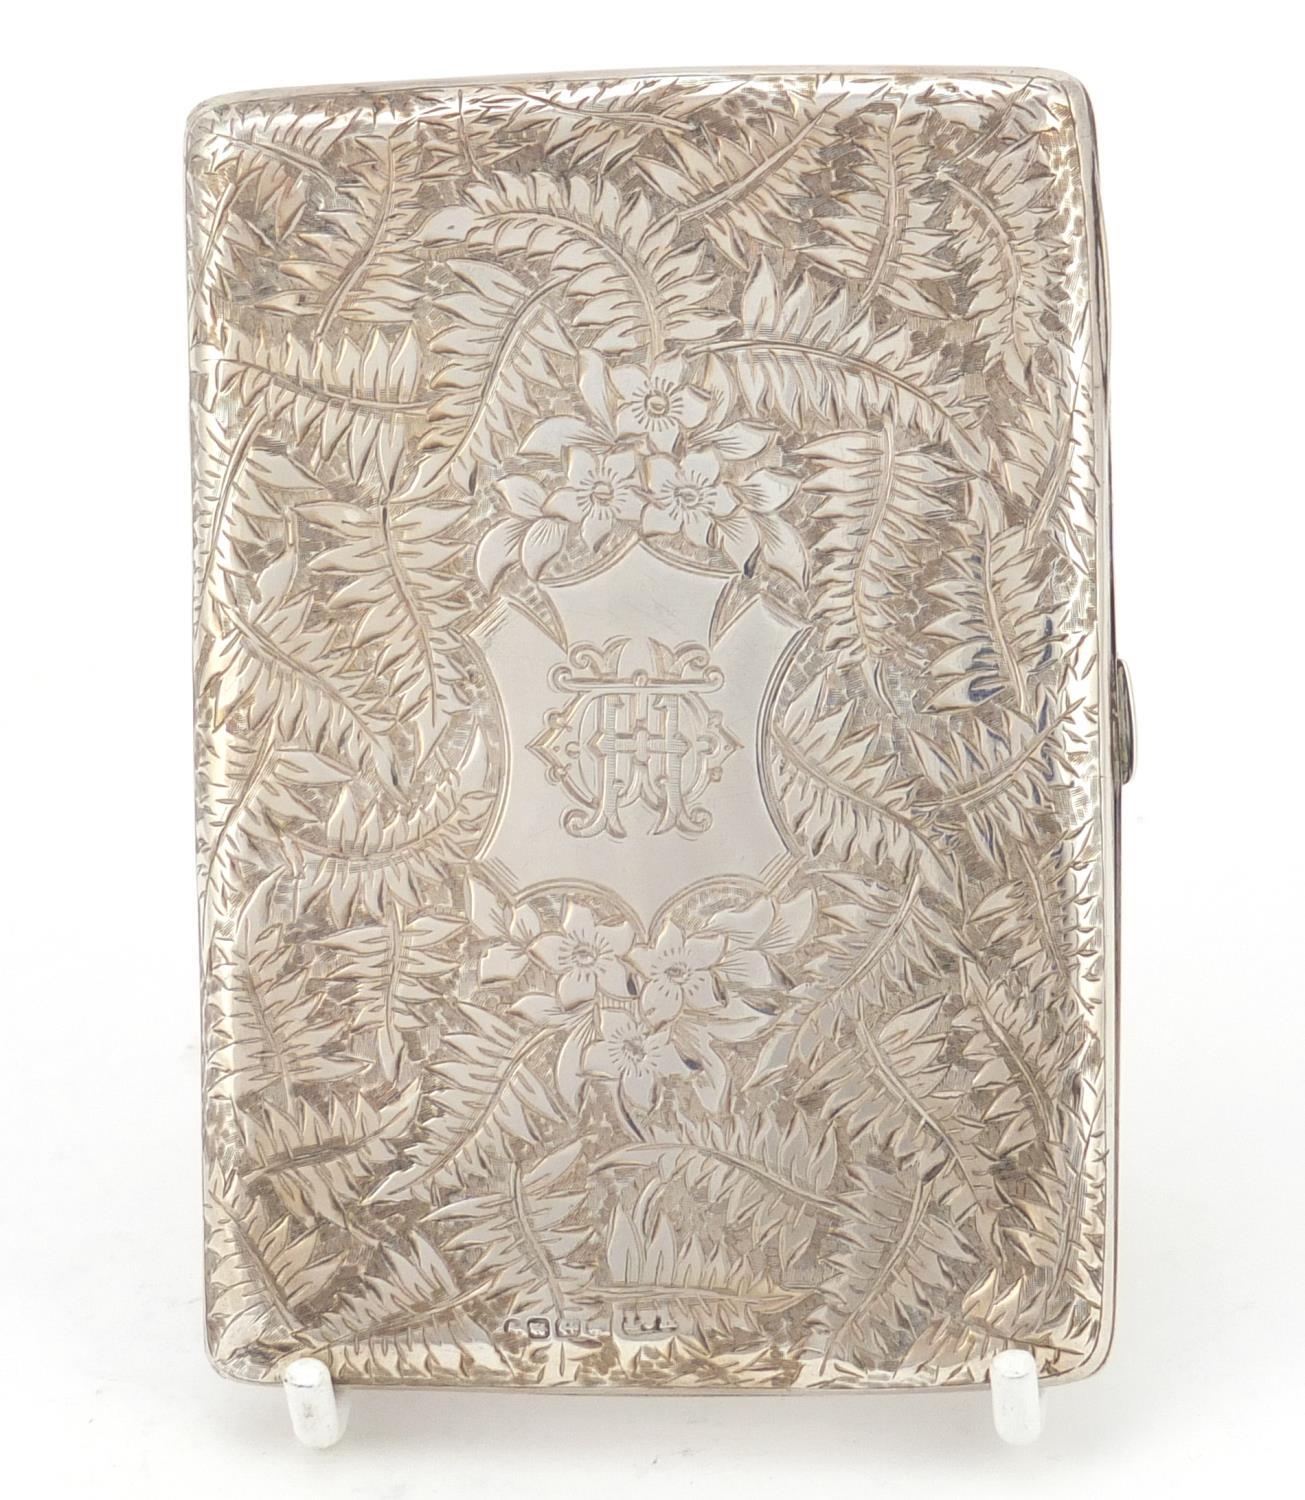 Victorian silver concertina card case, by Hilliard & Thomason, engraved and embossed with ferns, - Image 7 of 8